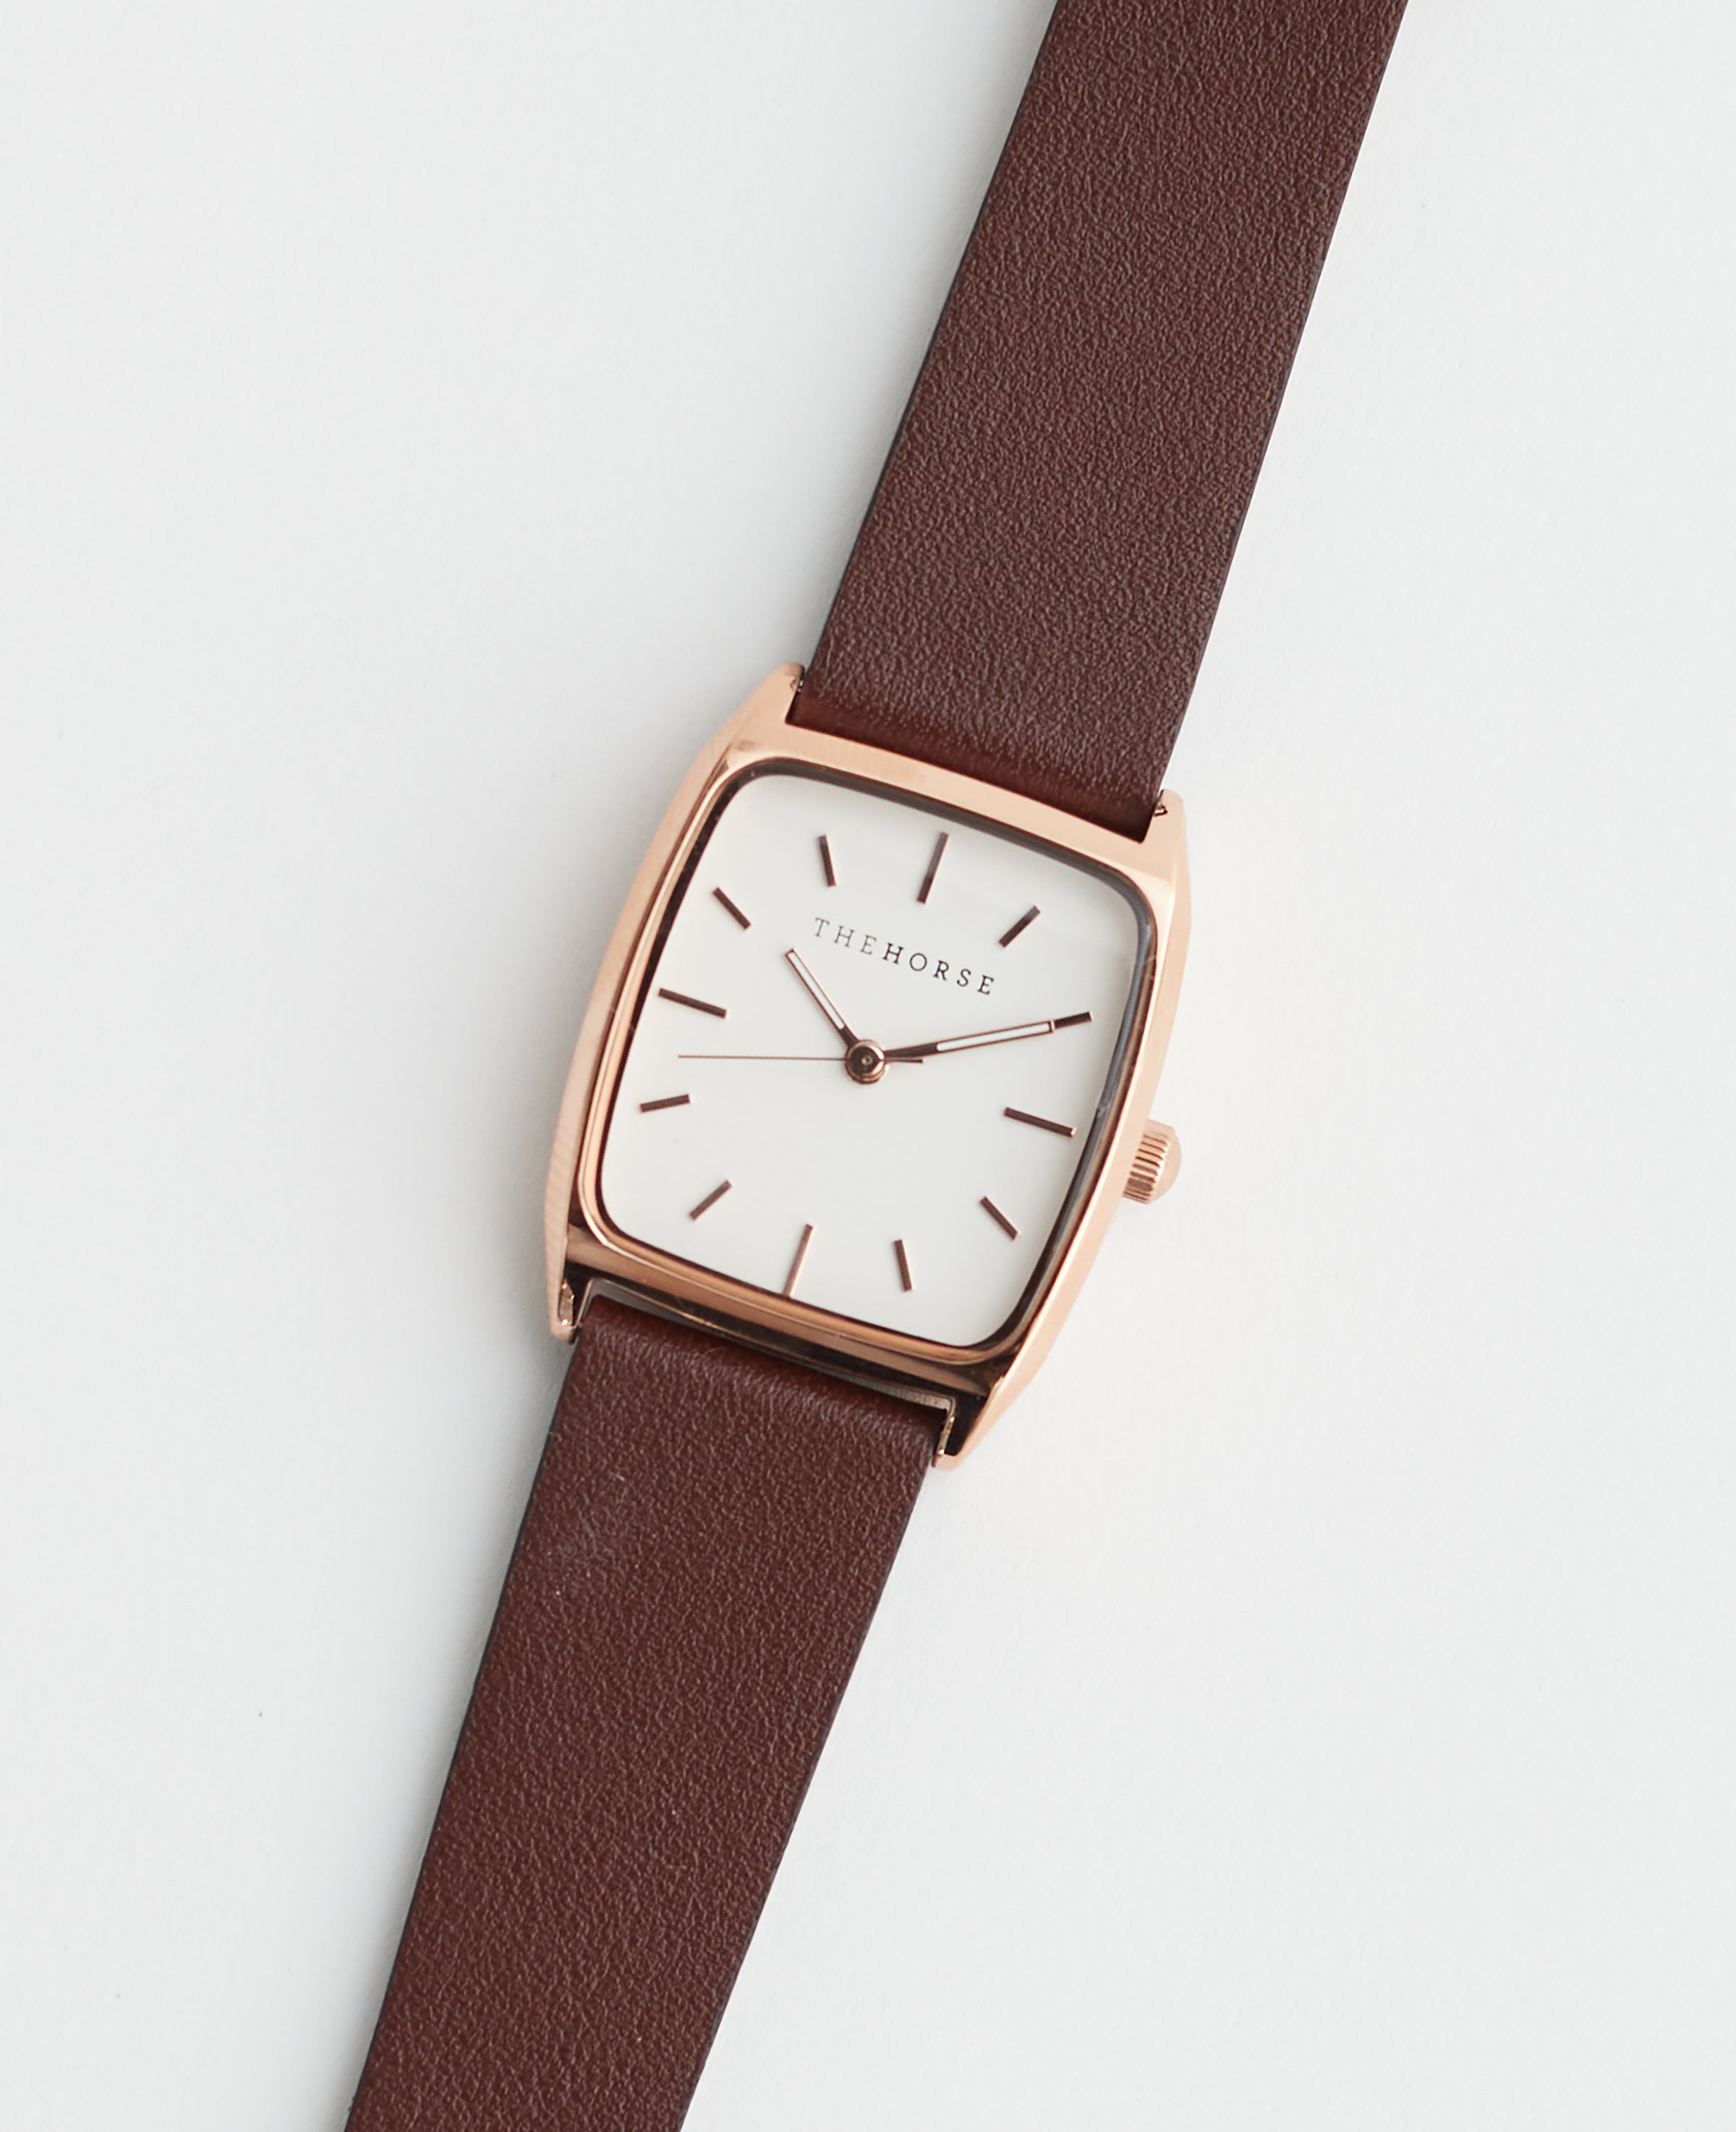 The Dress Watch: Rose Gold / White Dial / Coffee Leather